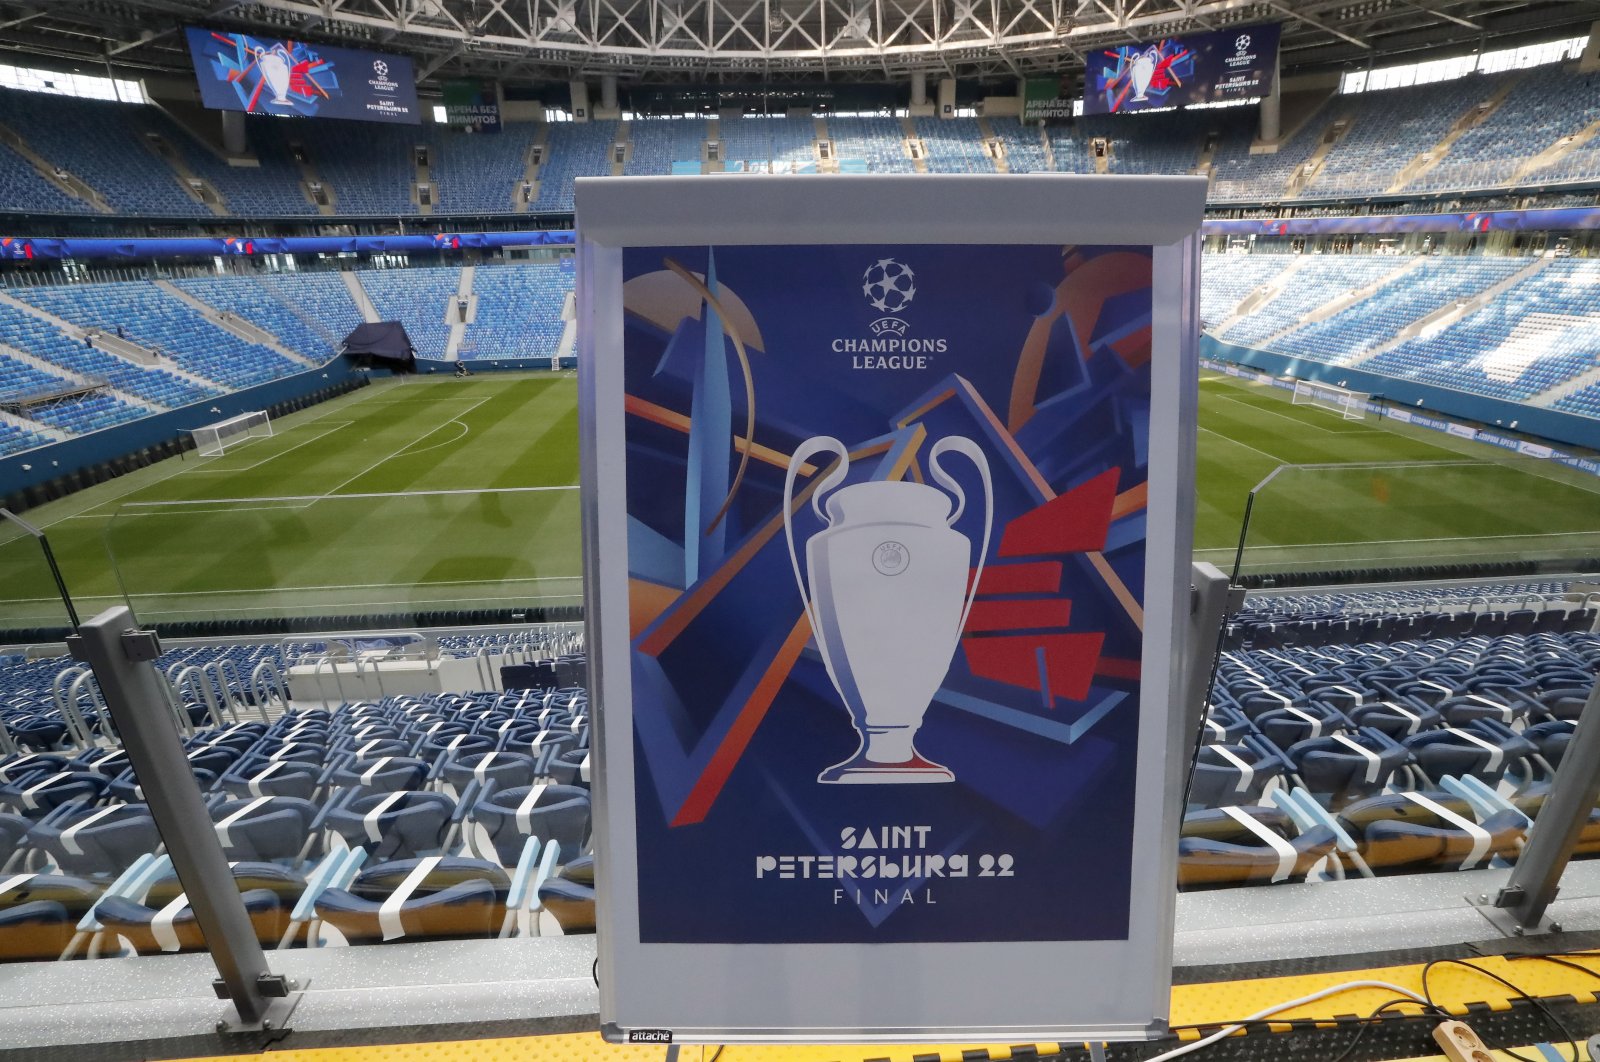 The official 2022 UEFA Champions League Final banner is on display at the Krestovsky Stadium in St. Petersburg, Russia, Sept. 22, 2021. (EPA Photo)